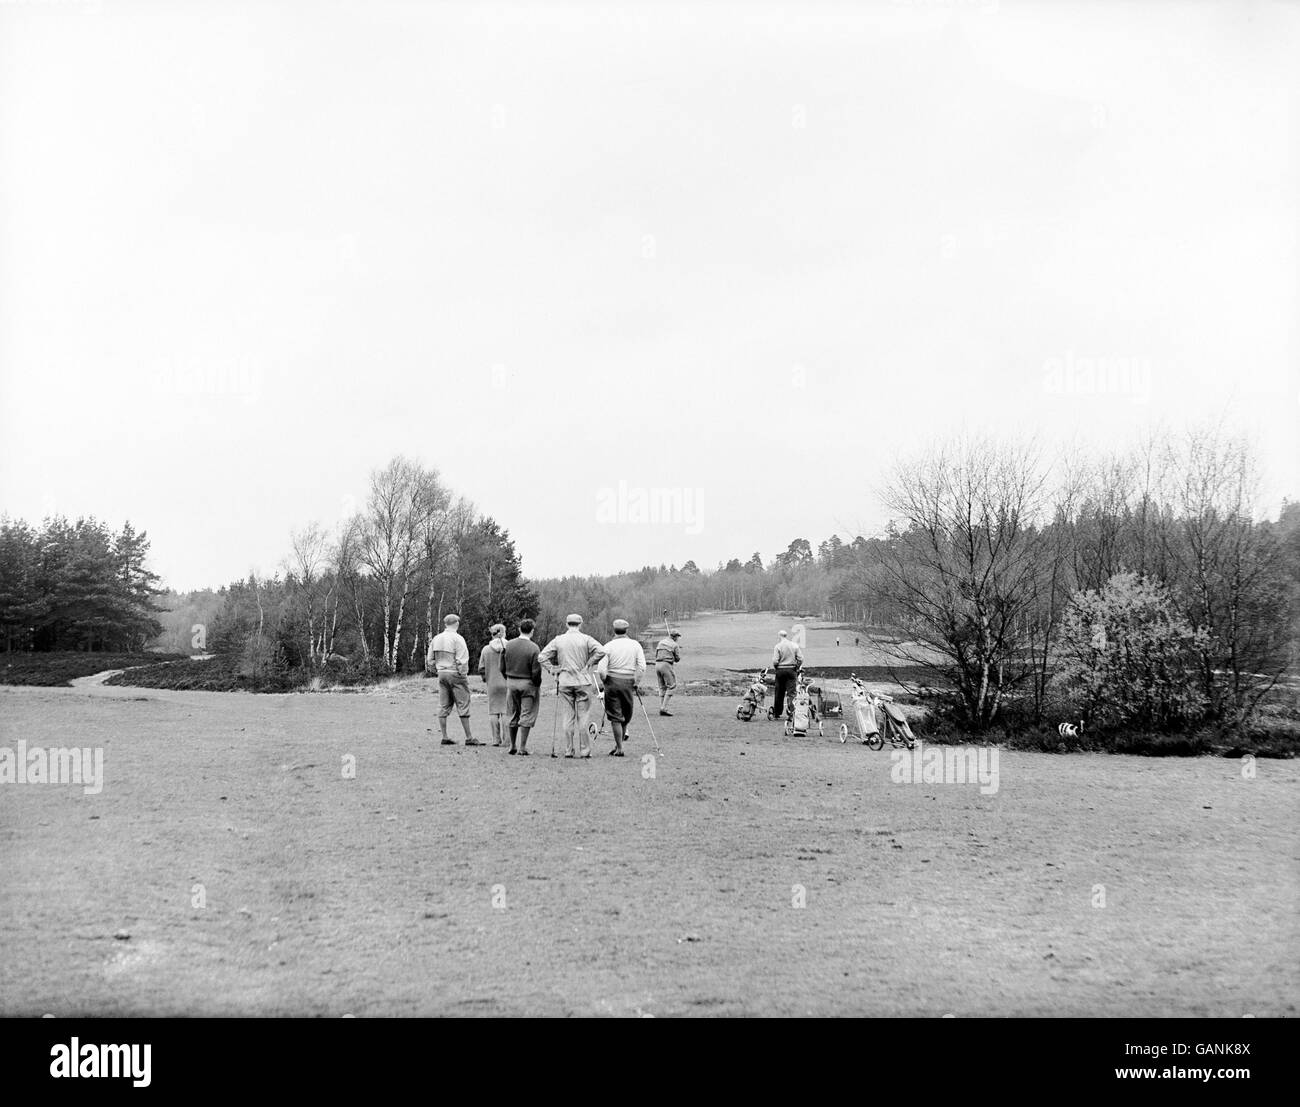 Golf - Berkshire Golf Club, Ascot. Looking down the first fairway of the Red Course Stock Photo